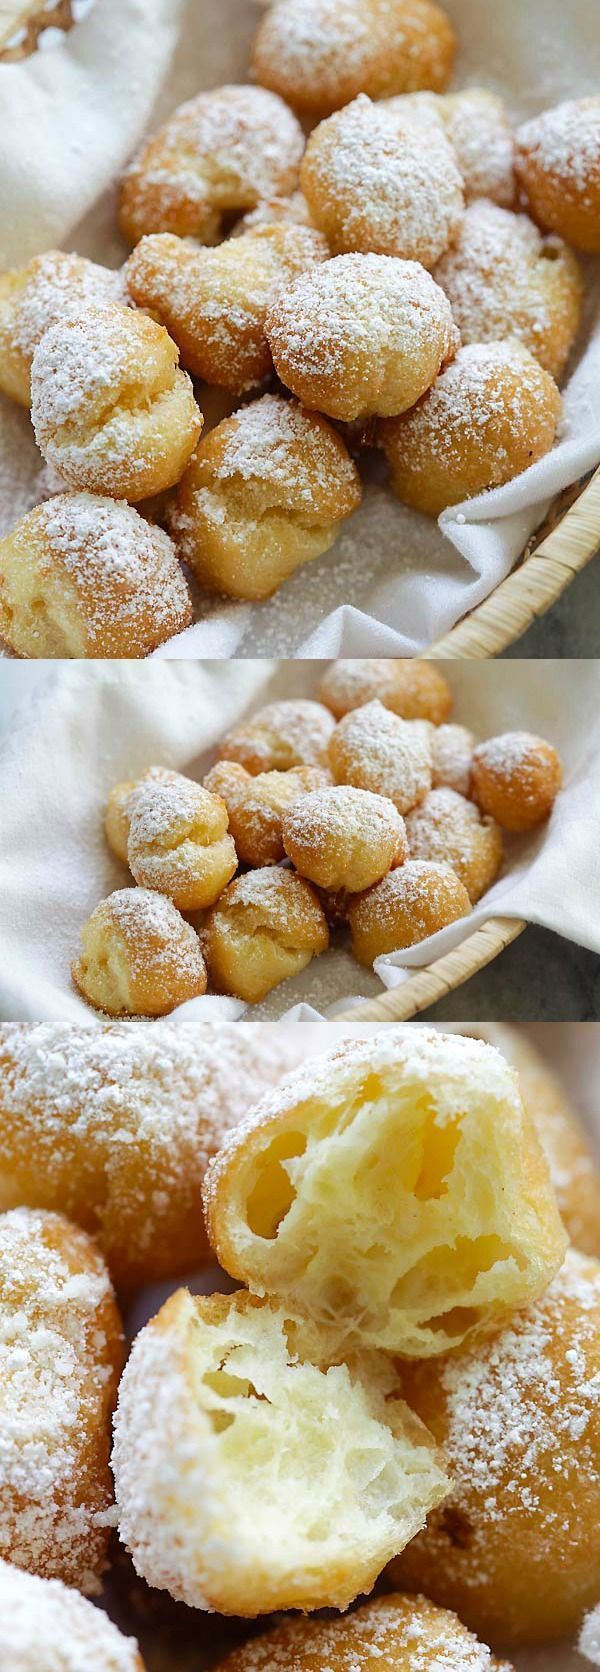 Homemade beignets have never been so easy and delicious! This easy beignet recipe is fail-proof and so good you can’t stop eating